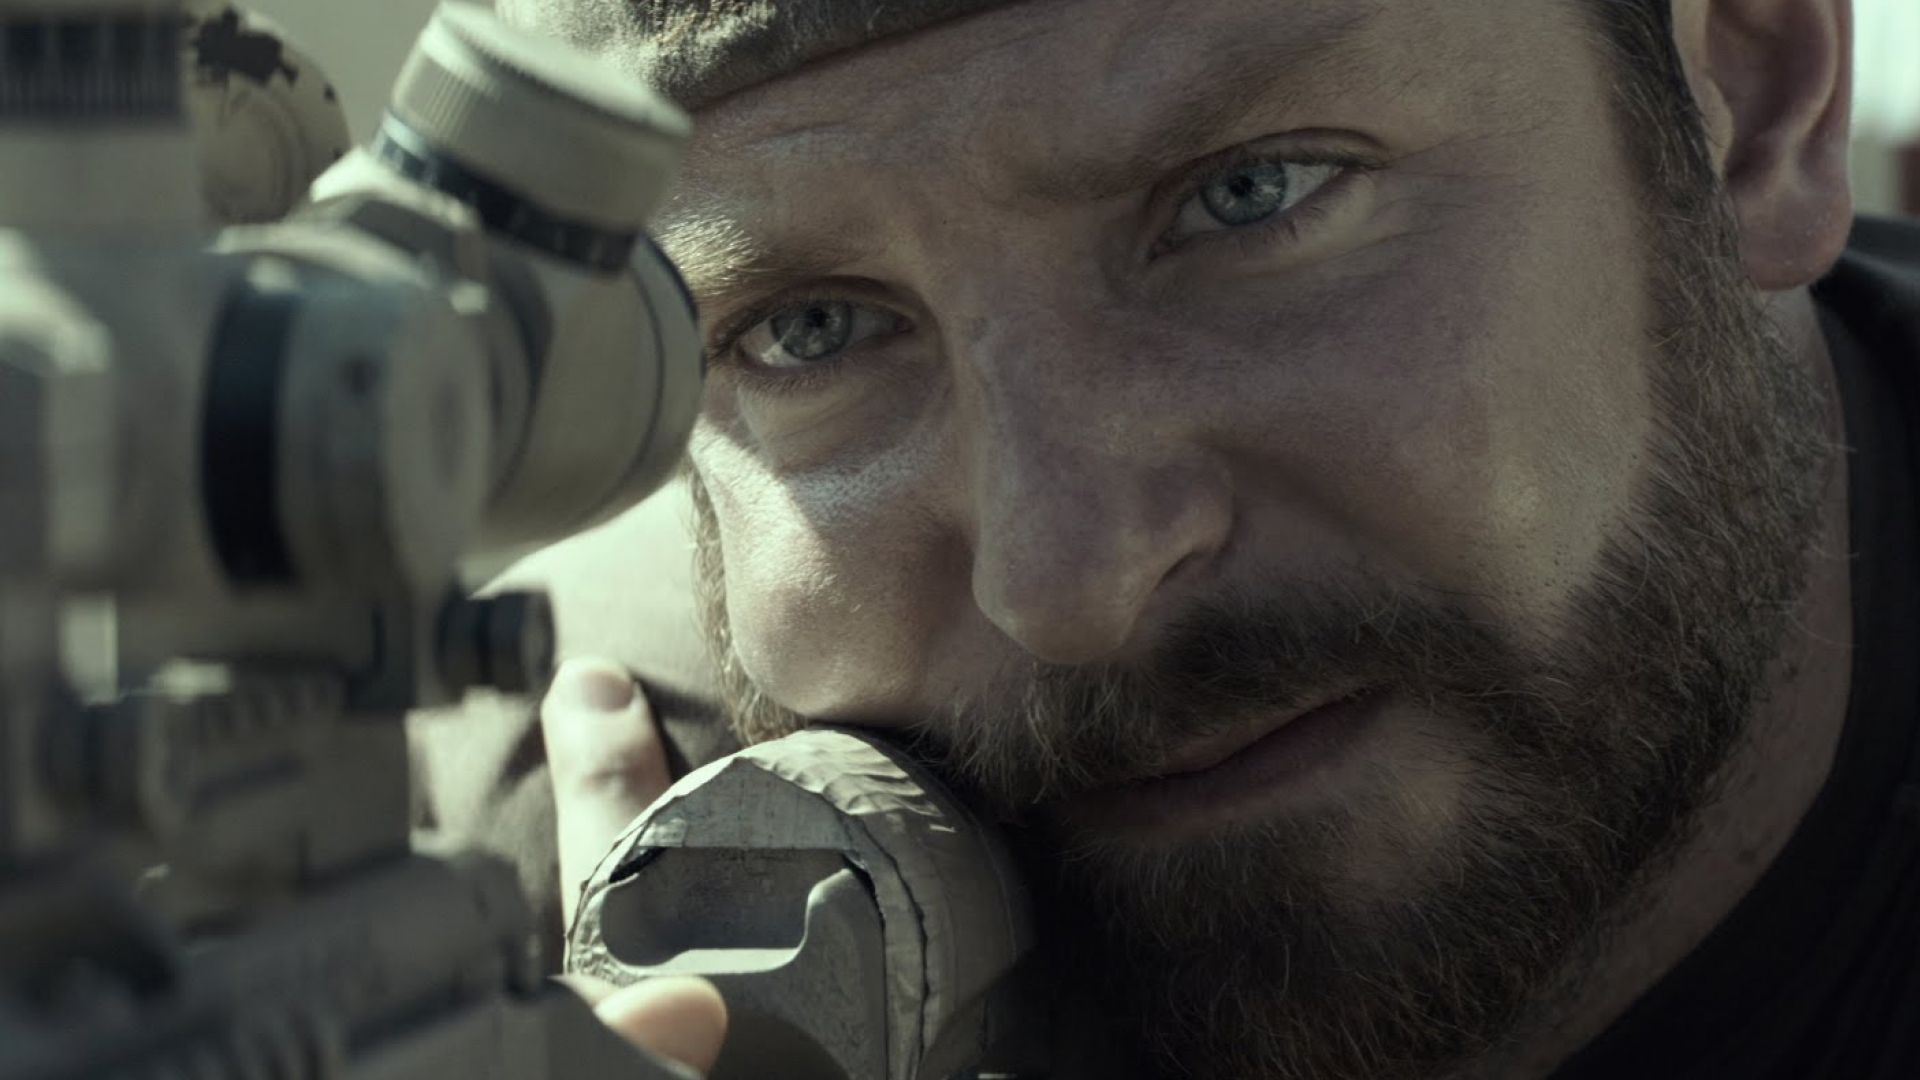 Second Official Trailer for &#039;American Sniper&#039;